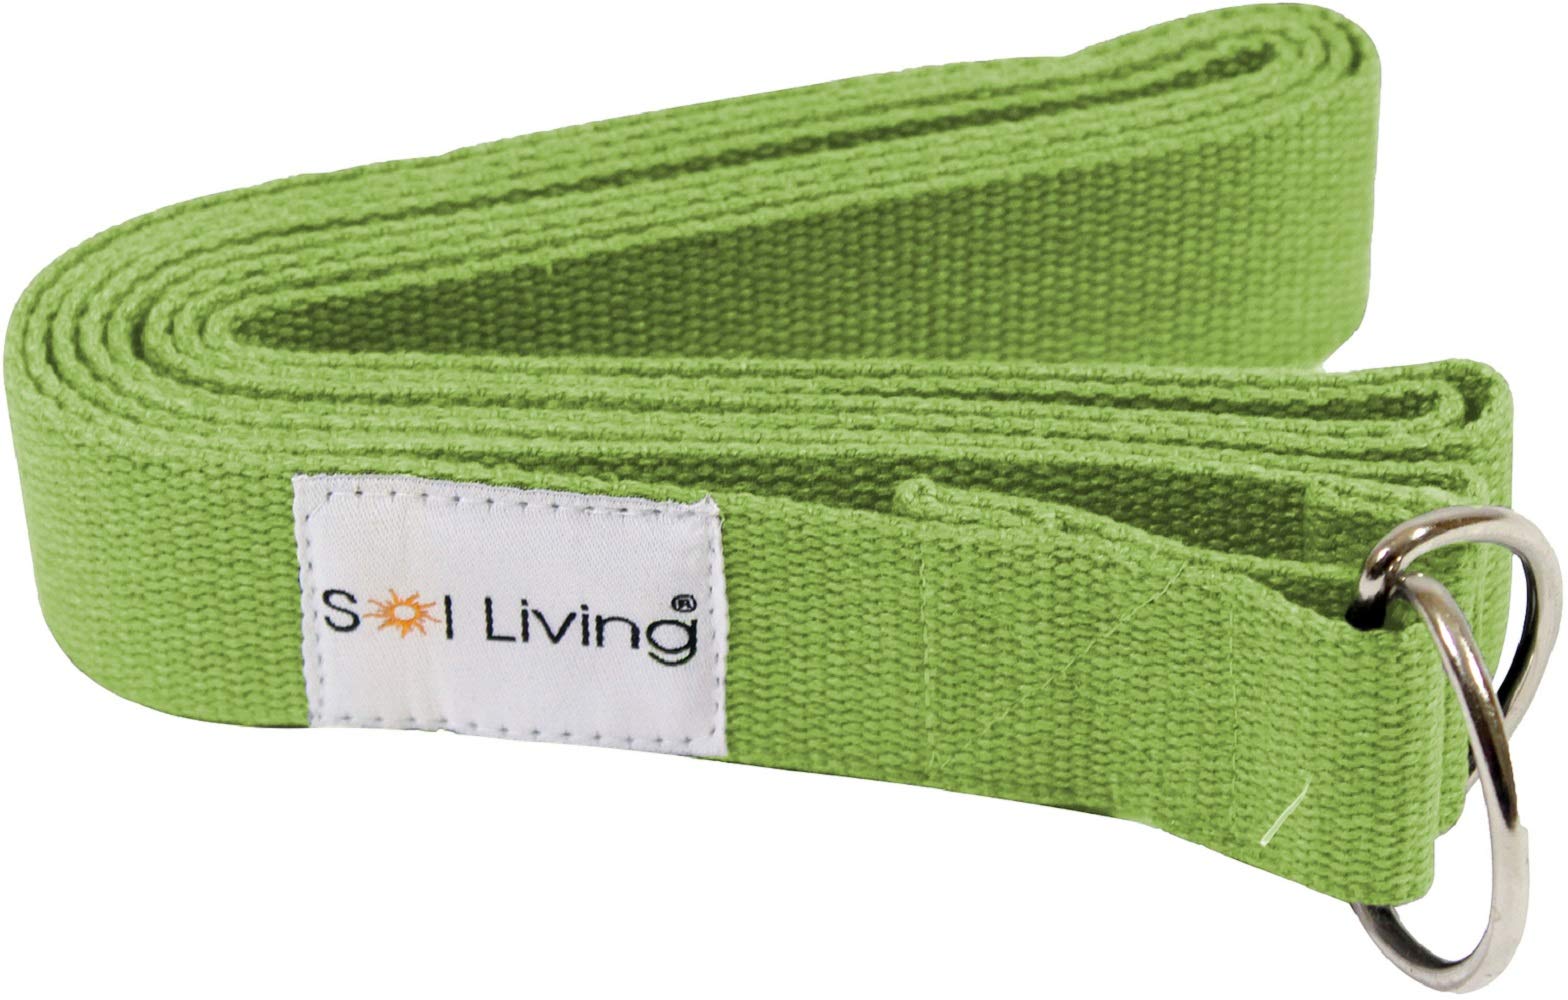 Sol Living Yoga Strap Stretch Band - Organic Cotton Exercise